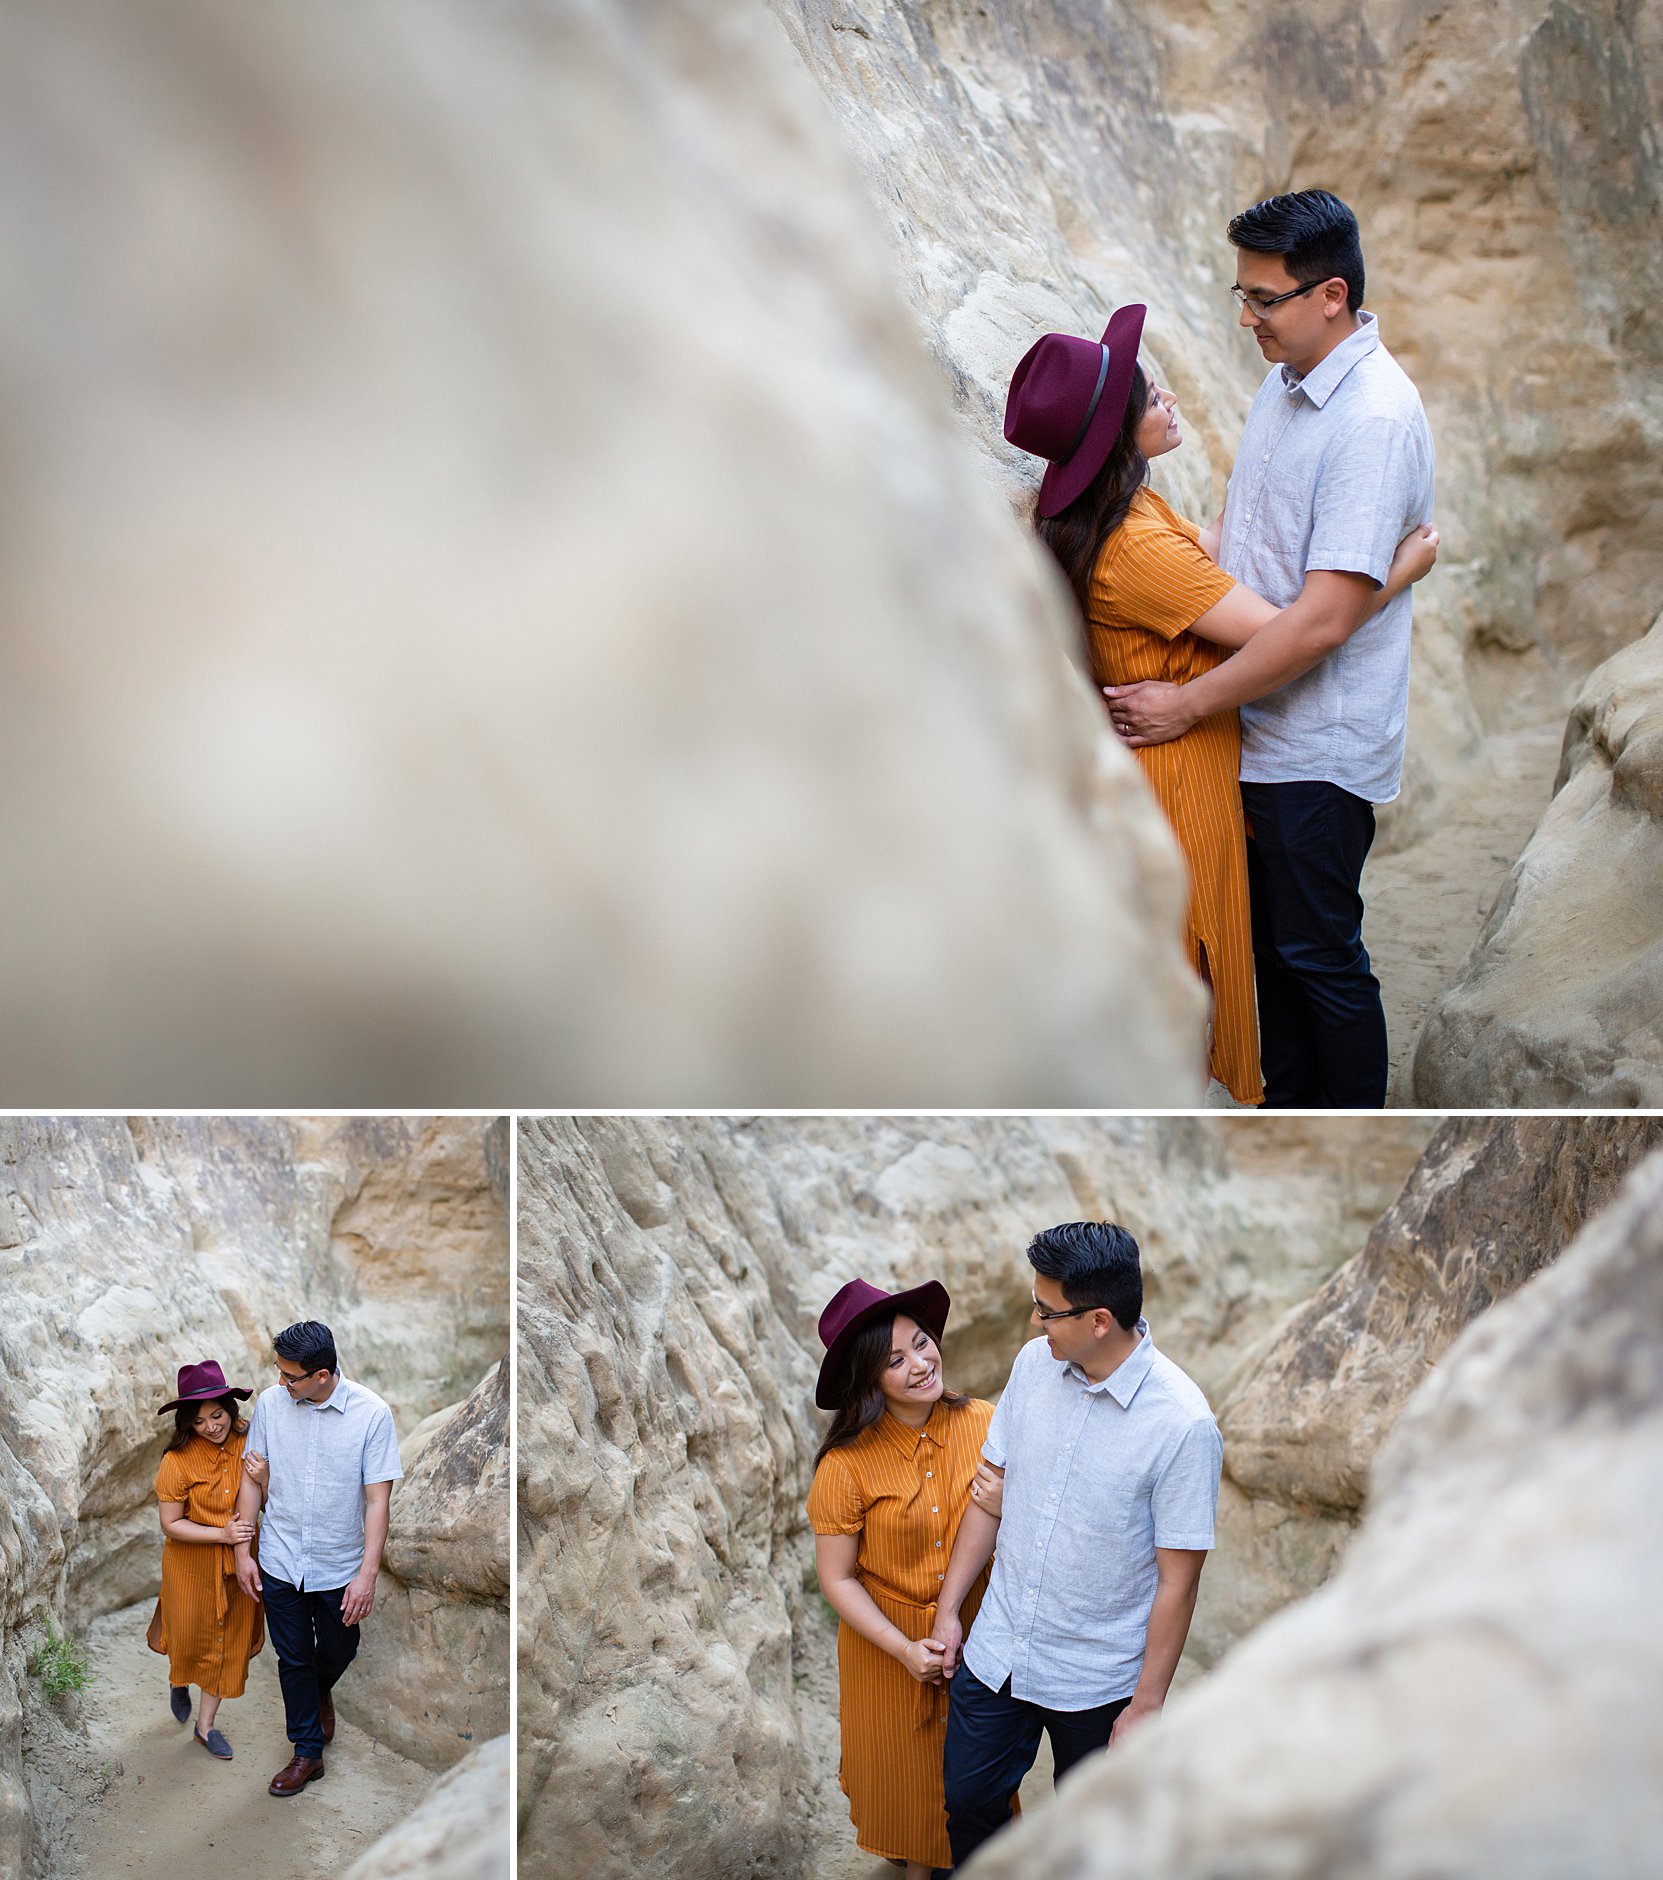 Annie's canyon trail engagement session with awesome white rock formation